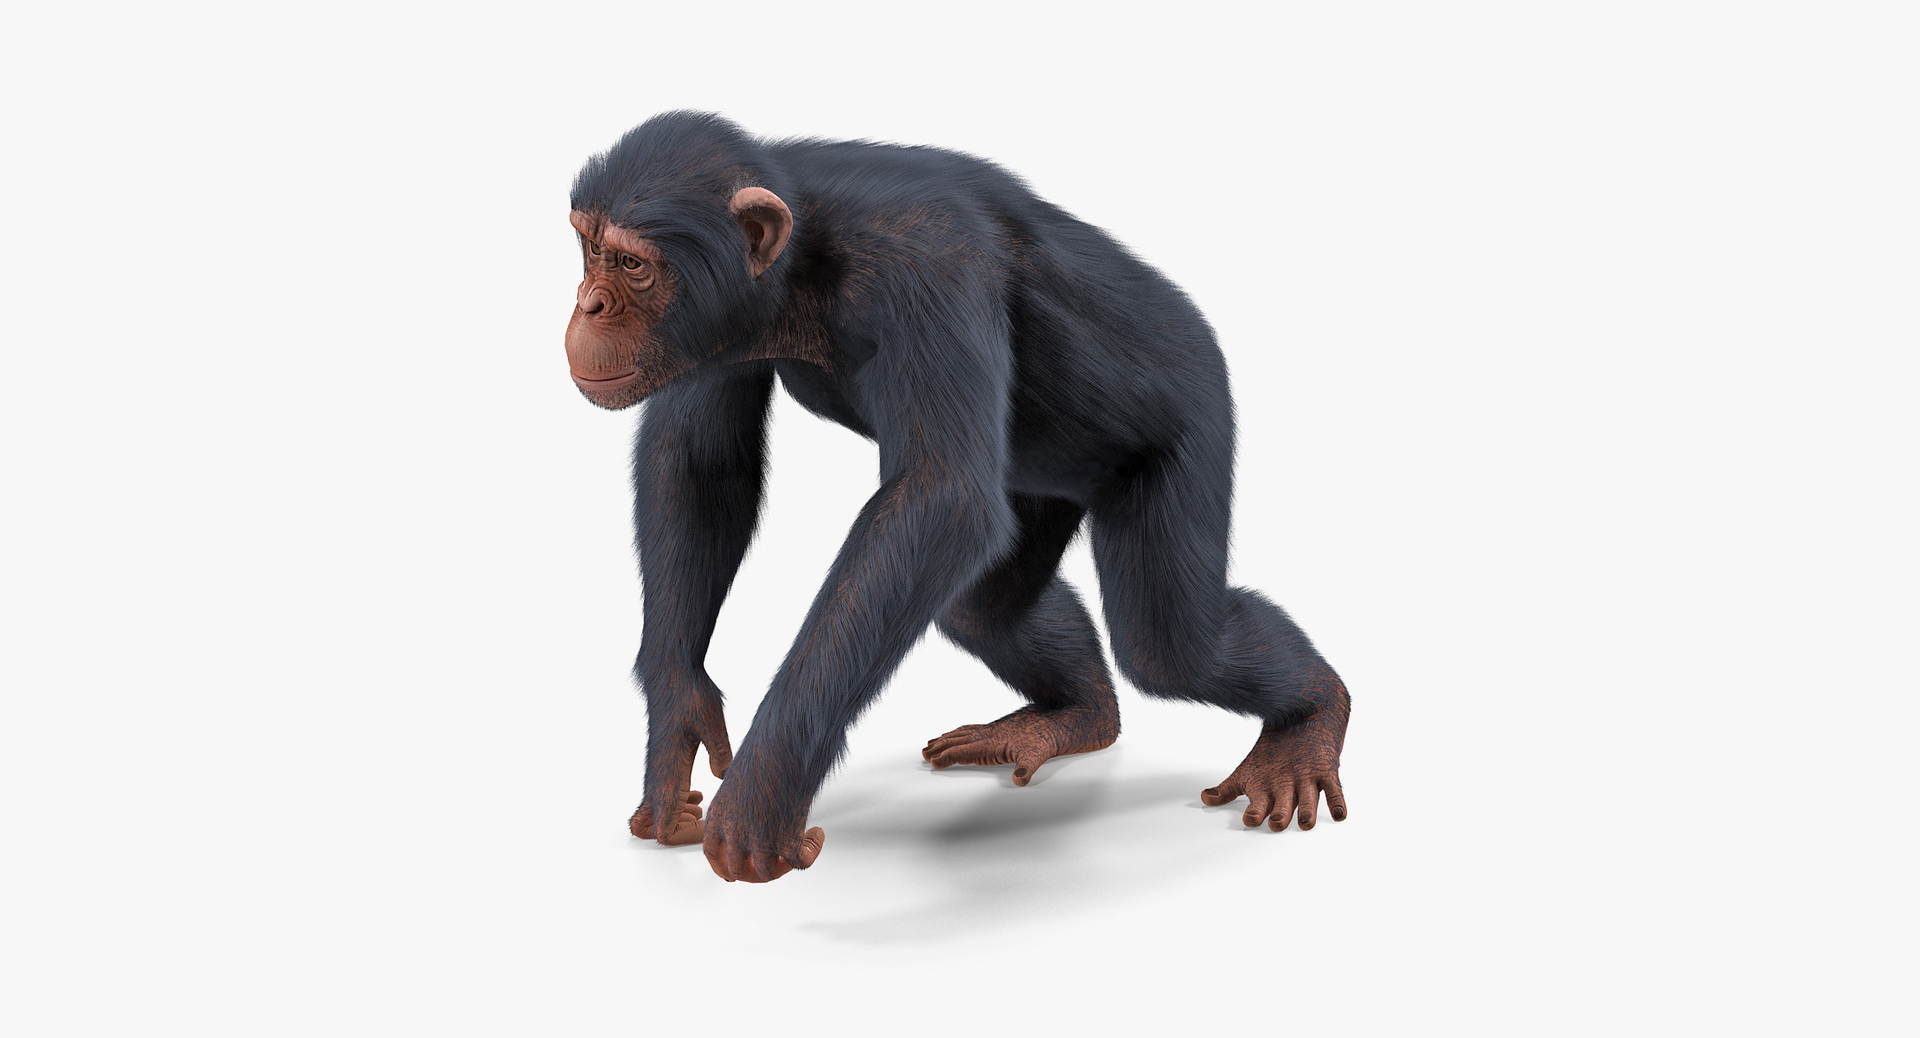 Monkey Standing: Over 7,093 Royalty-Free Licensable Stock Illustrations &  Drawings | Shutterstock